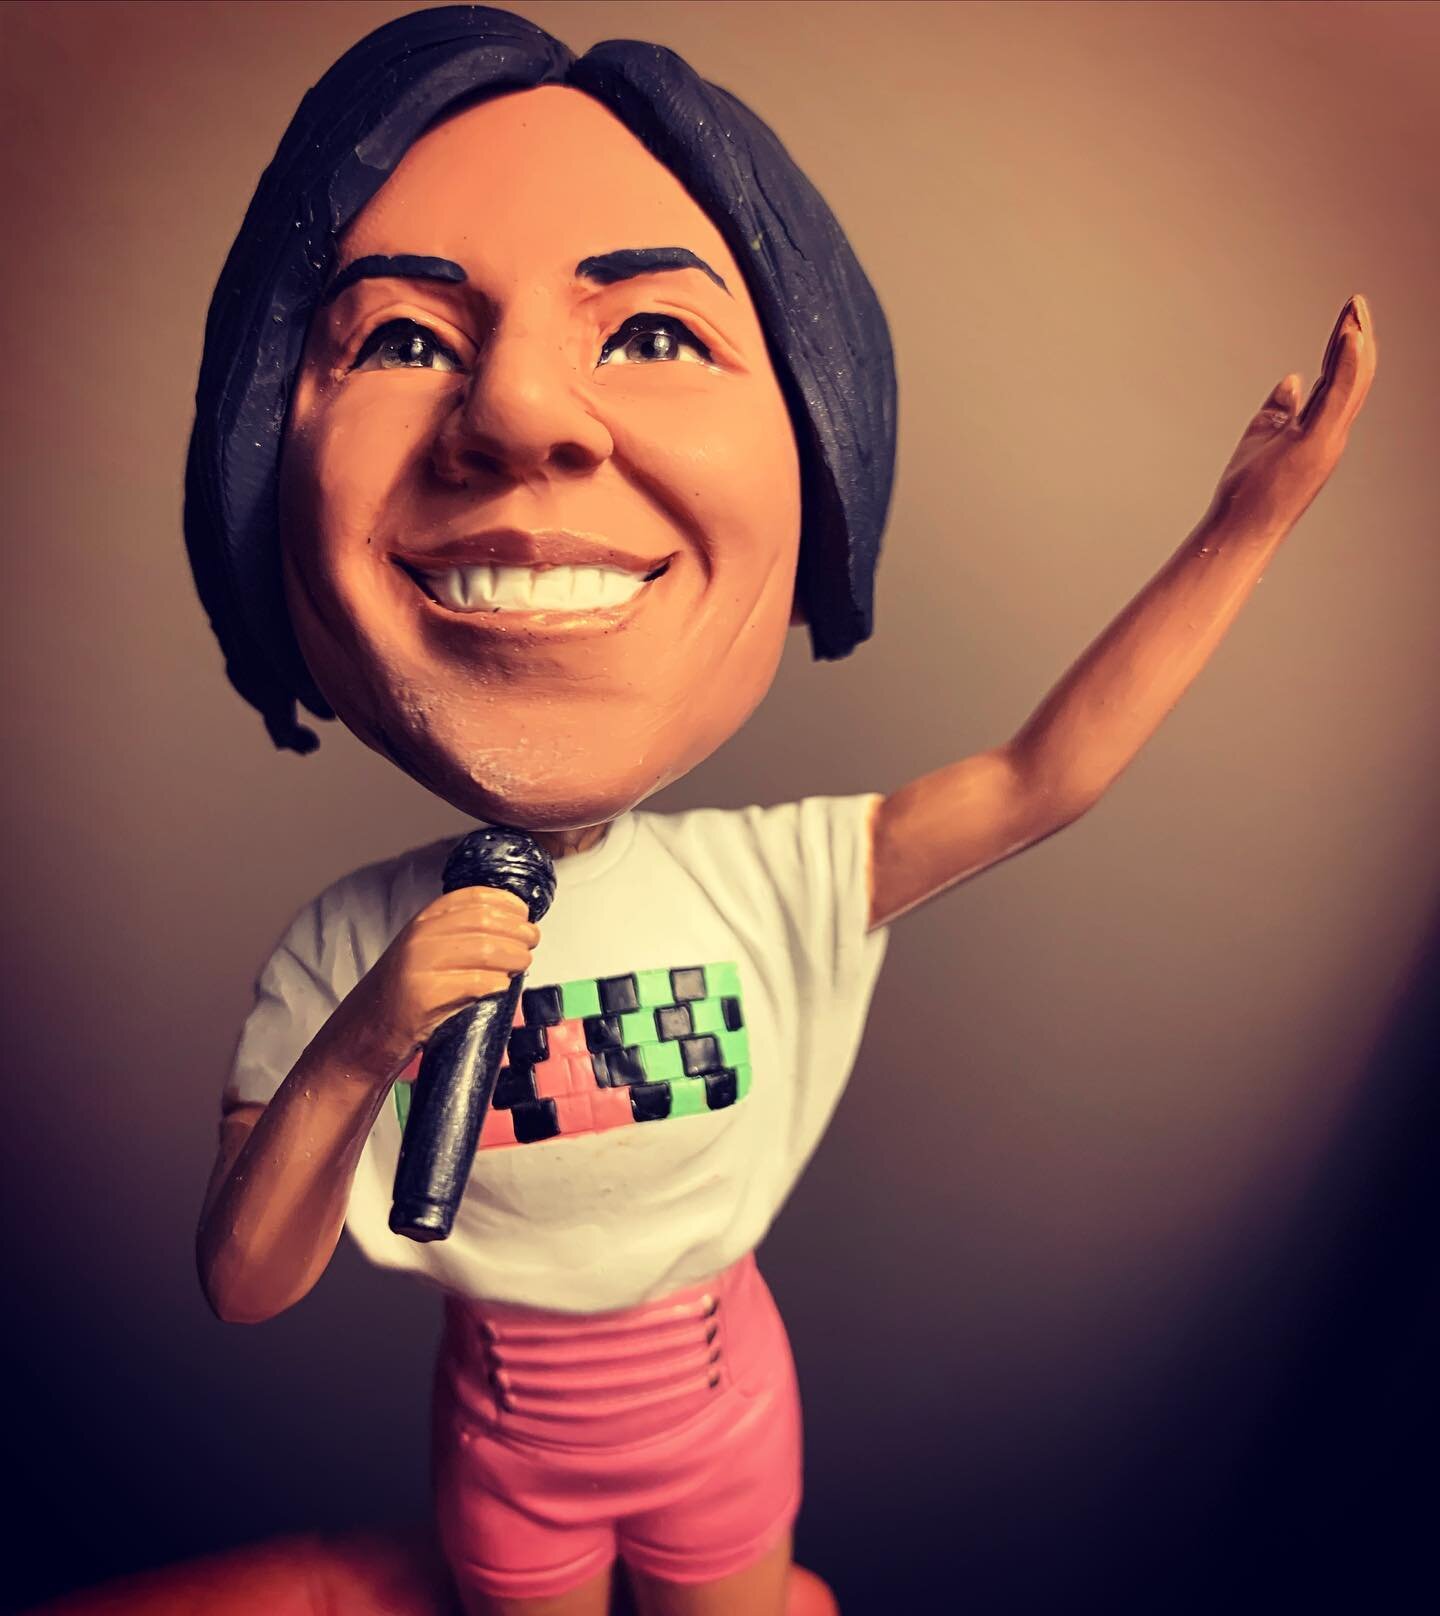 My mom ordered a bobble head of me as a gift. Don&rsquo;t ask. I have no answers.

This is what came. I&rsquo;ve never been more grateful for a sense of humor...and hot pants. I&rsquo;m also grateful for the hot pants.

If you&rsquo;re wondering if s